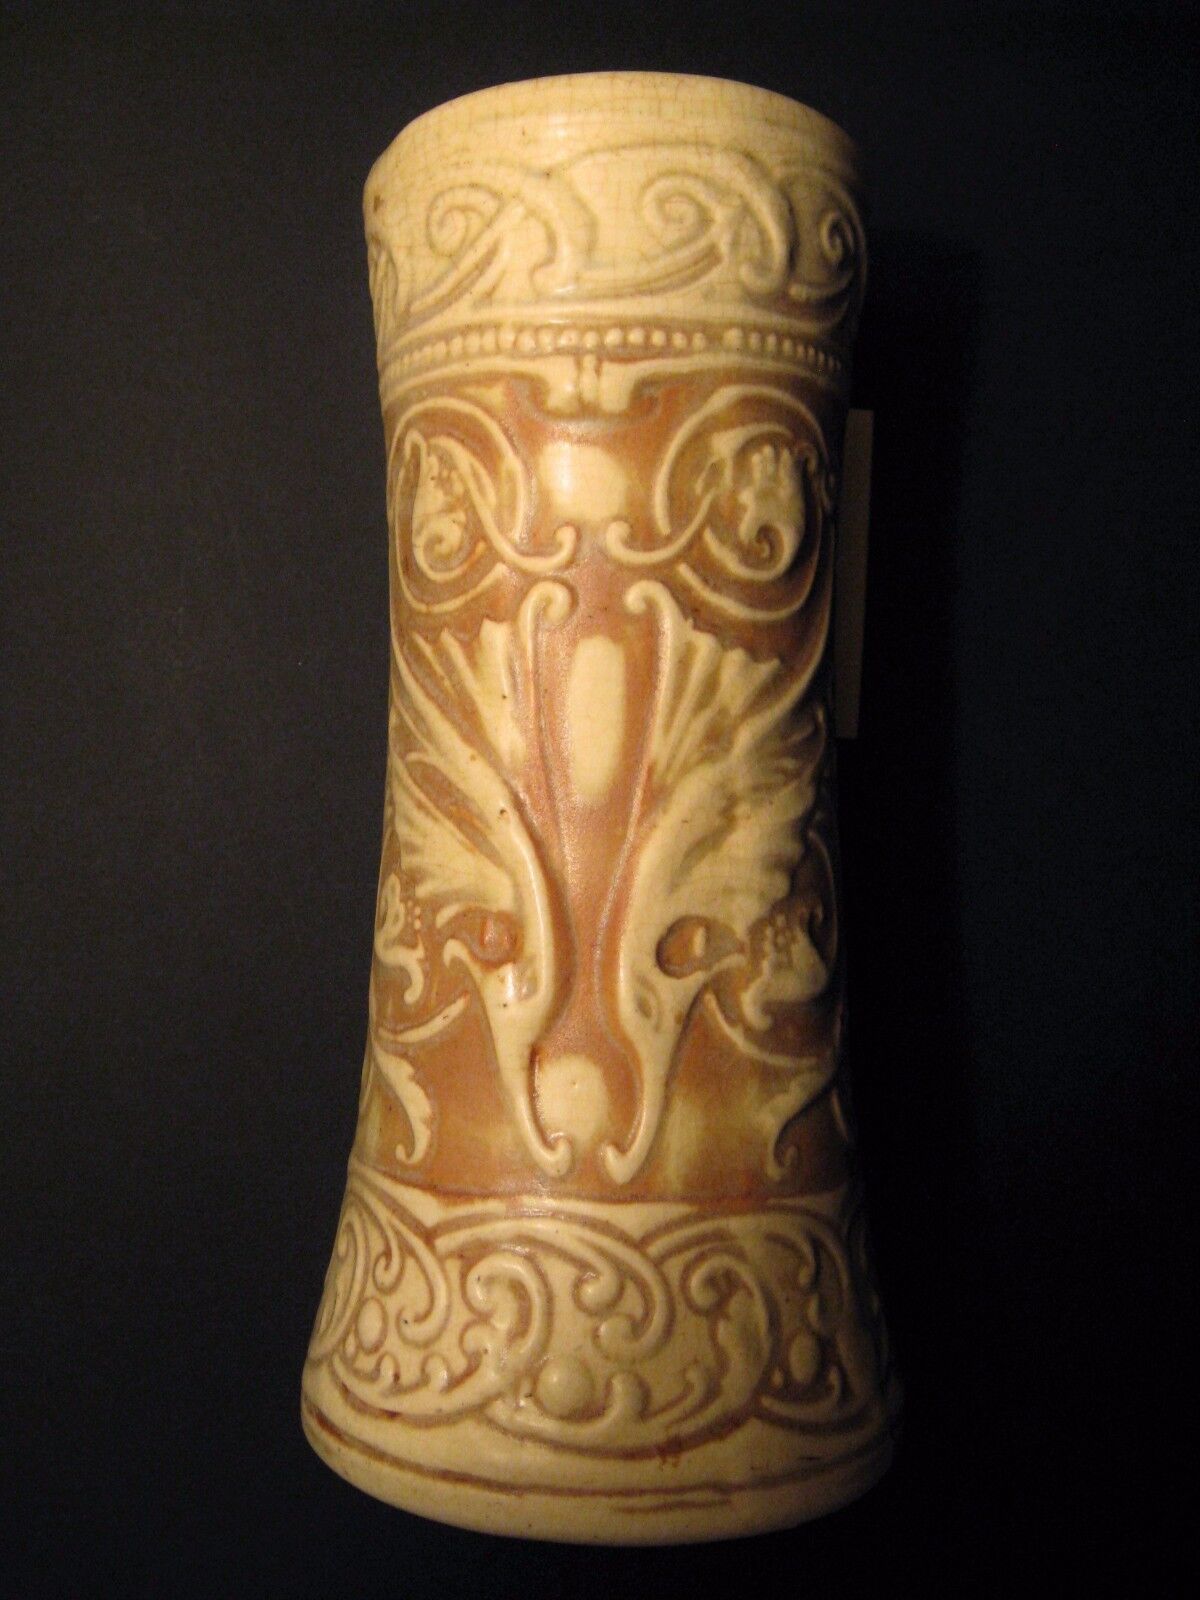 Tall Early POTTERY ART VASE, ca. 1914 WELLER Clinton Ivory, NICE CONDITION